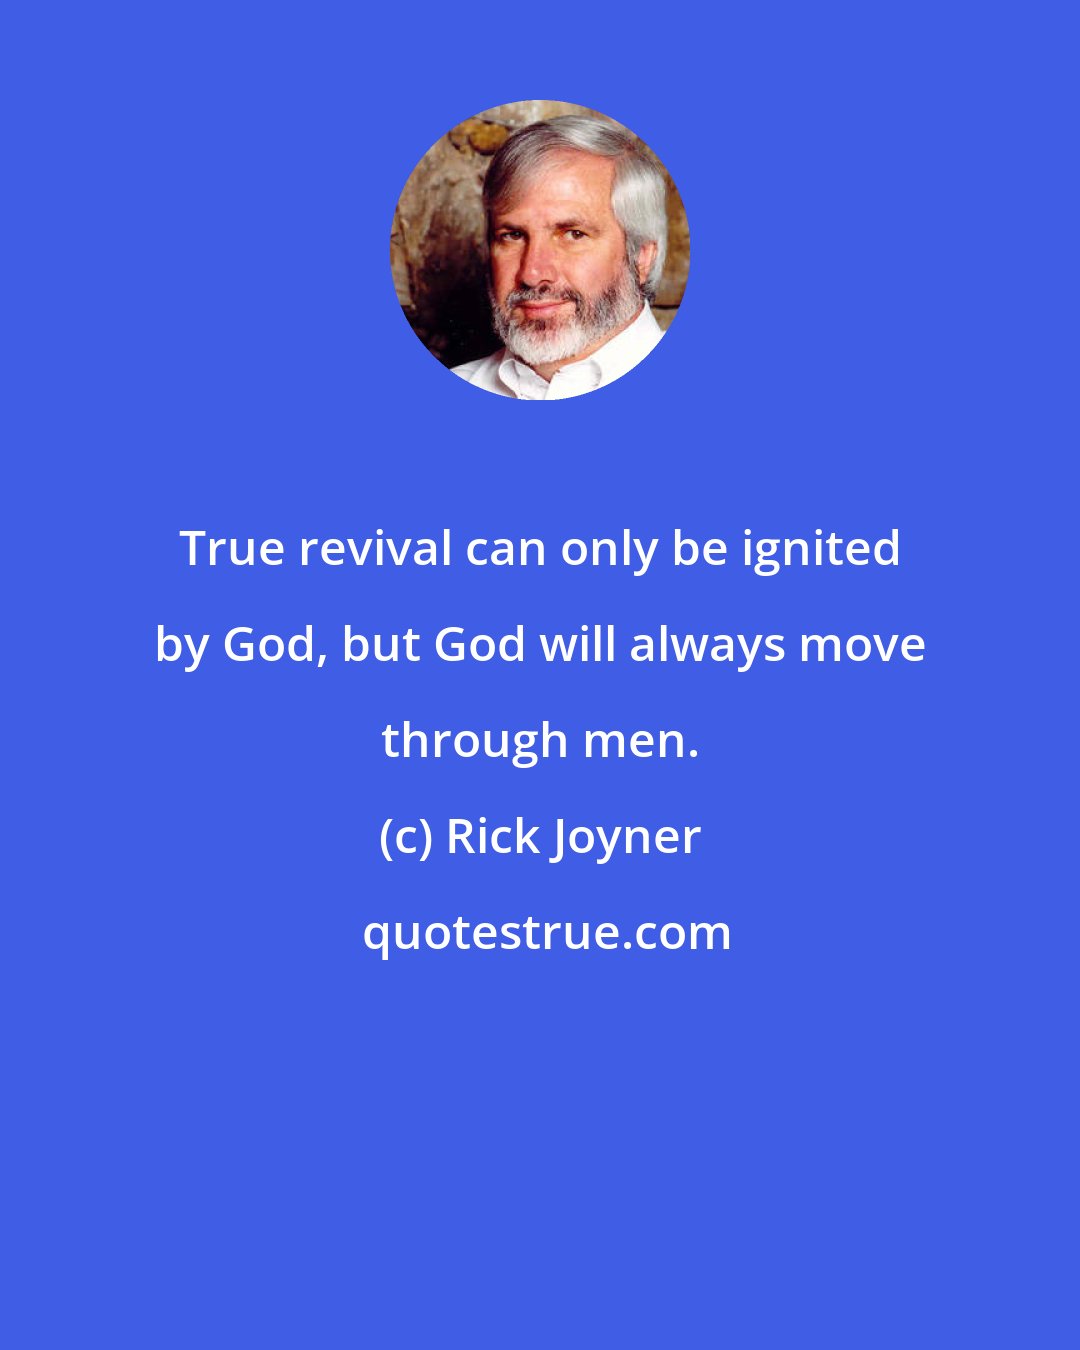 Rick Joyner: True revival can only be ignited by God, but God will always move through men.